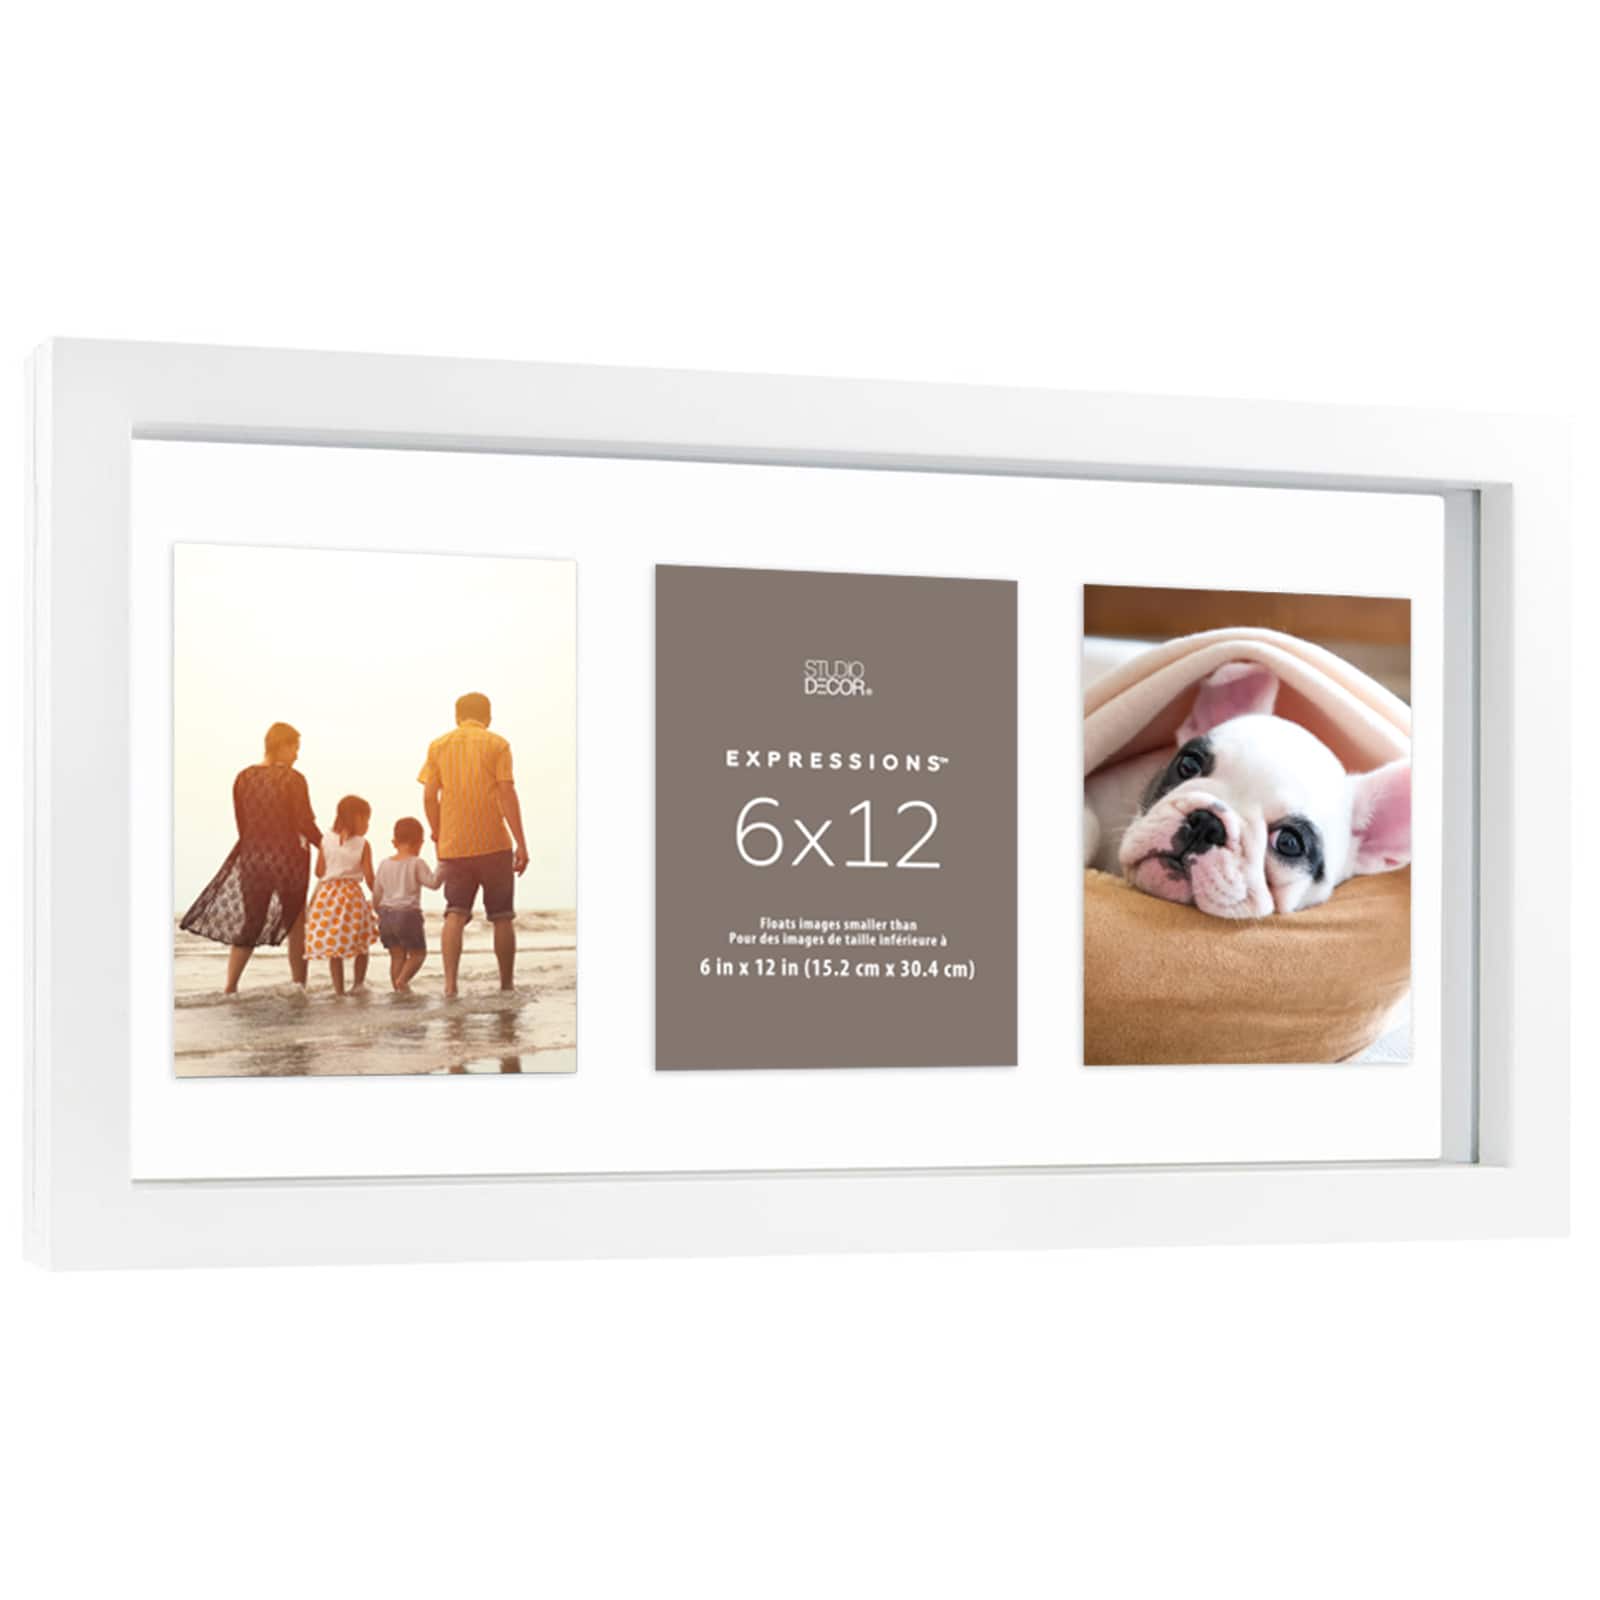 2 Opening Black Hinge 6 x 8 Float Frame, Expressions™ by Studio Décor®